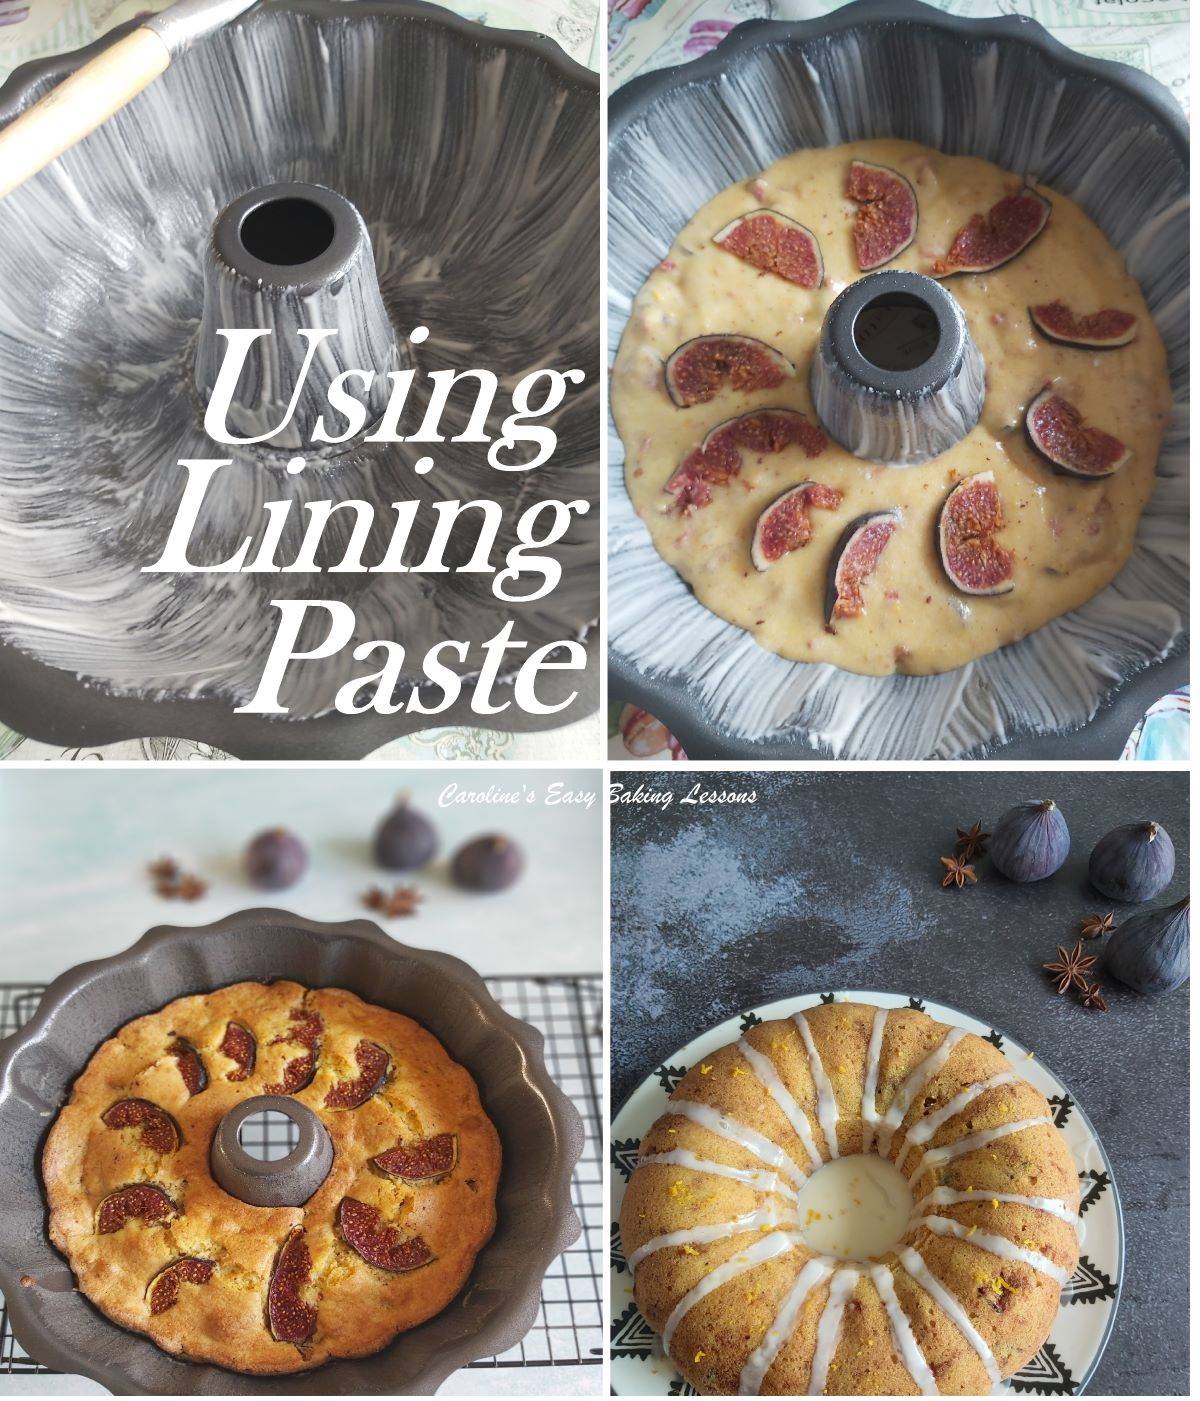 Lining Paste – Review Of Nancy Birtwhistle’s Recipe